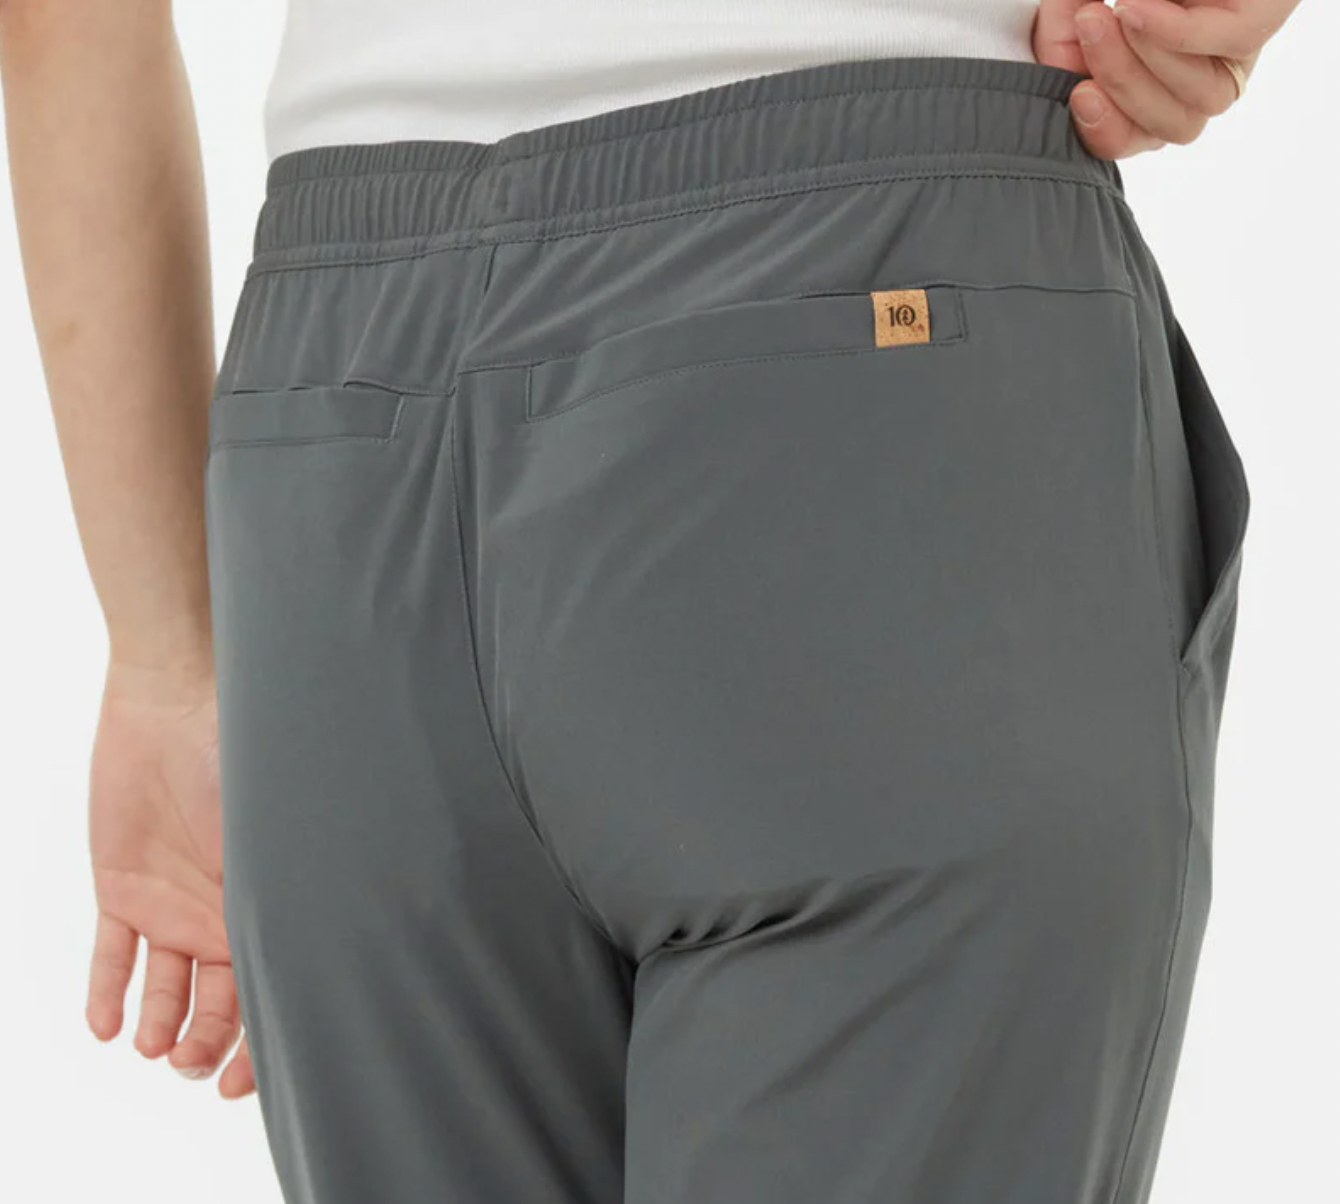 W InMotion Pacific Jogger